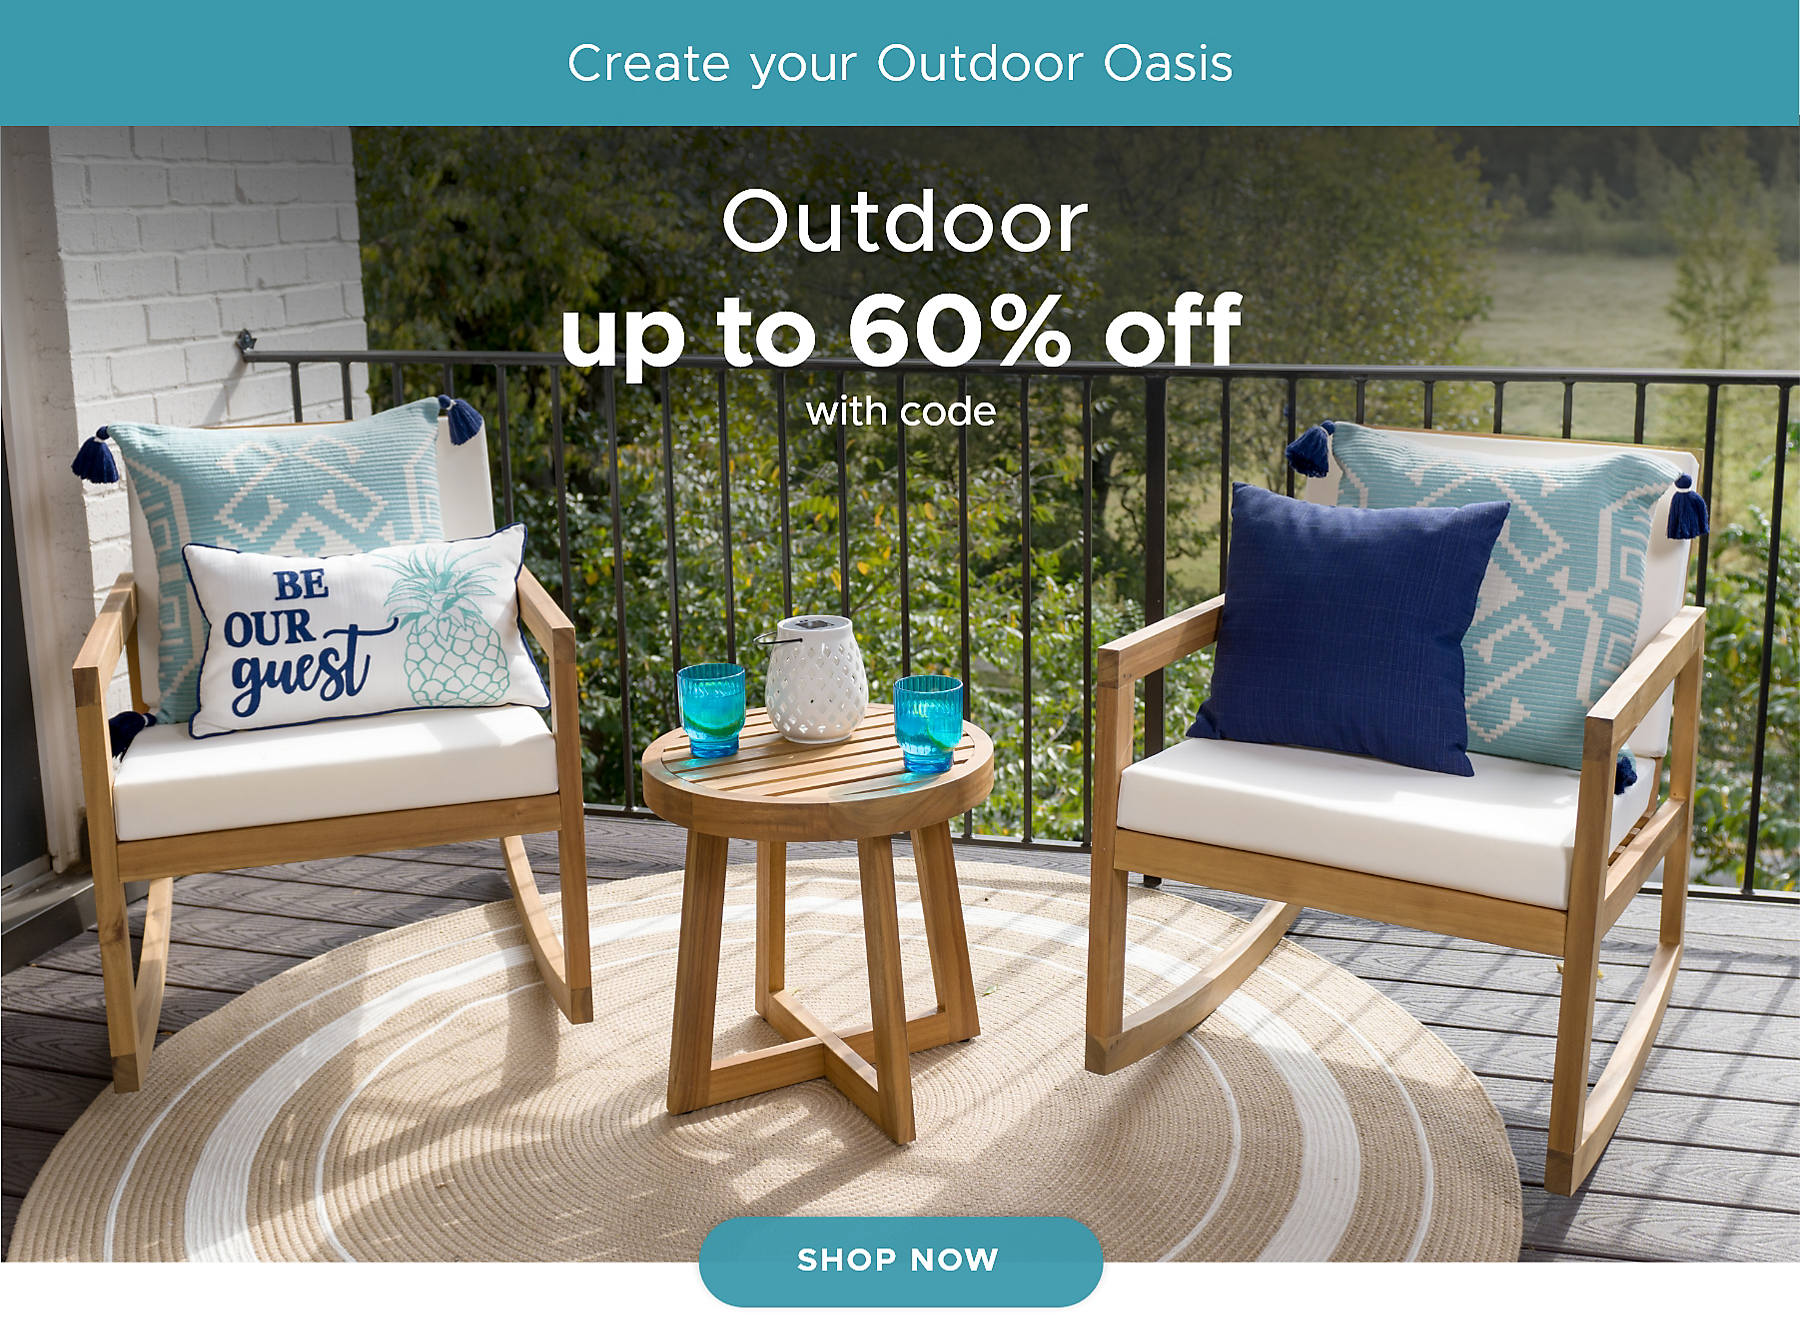 Create your Outdoor Oasis Outdoor up to 60% off shop now